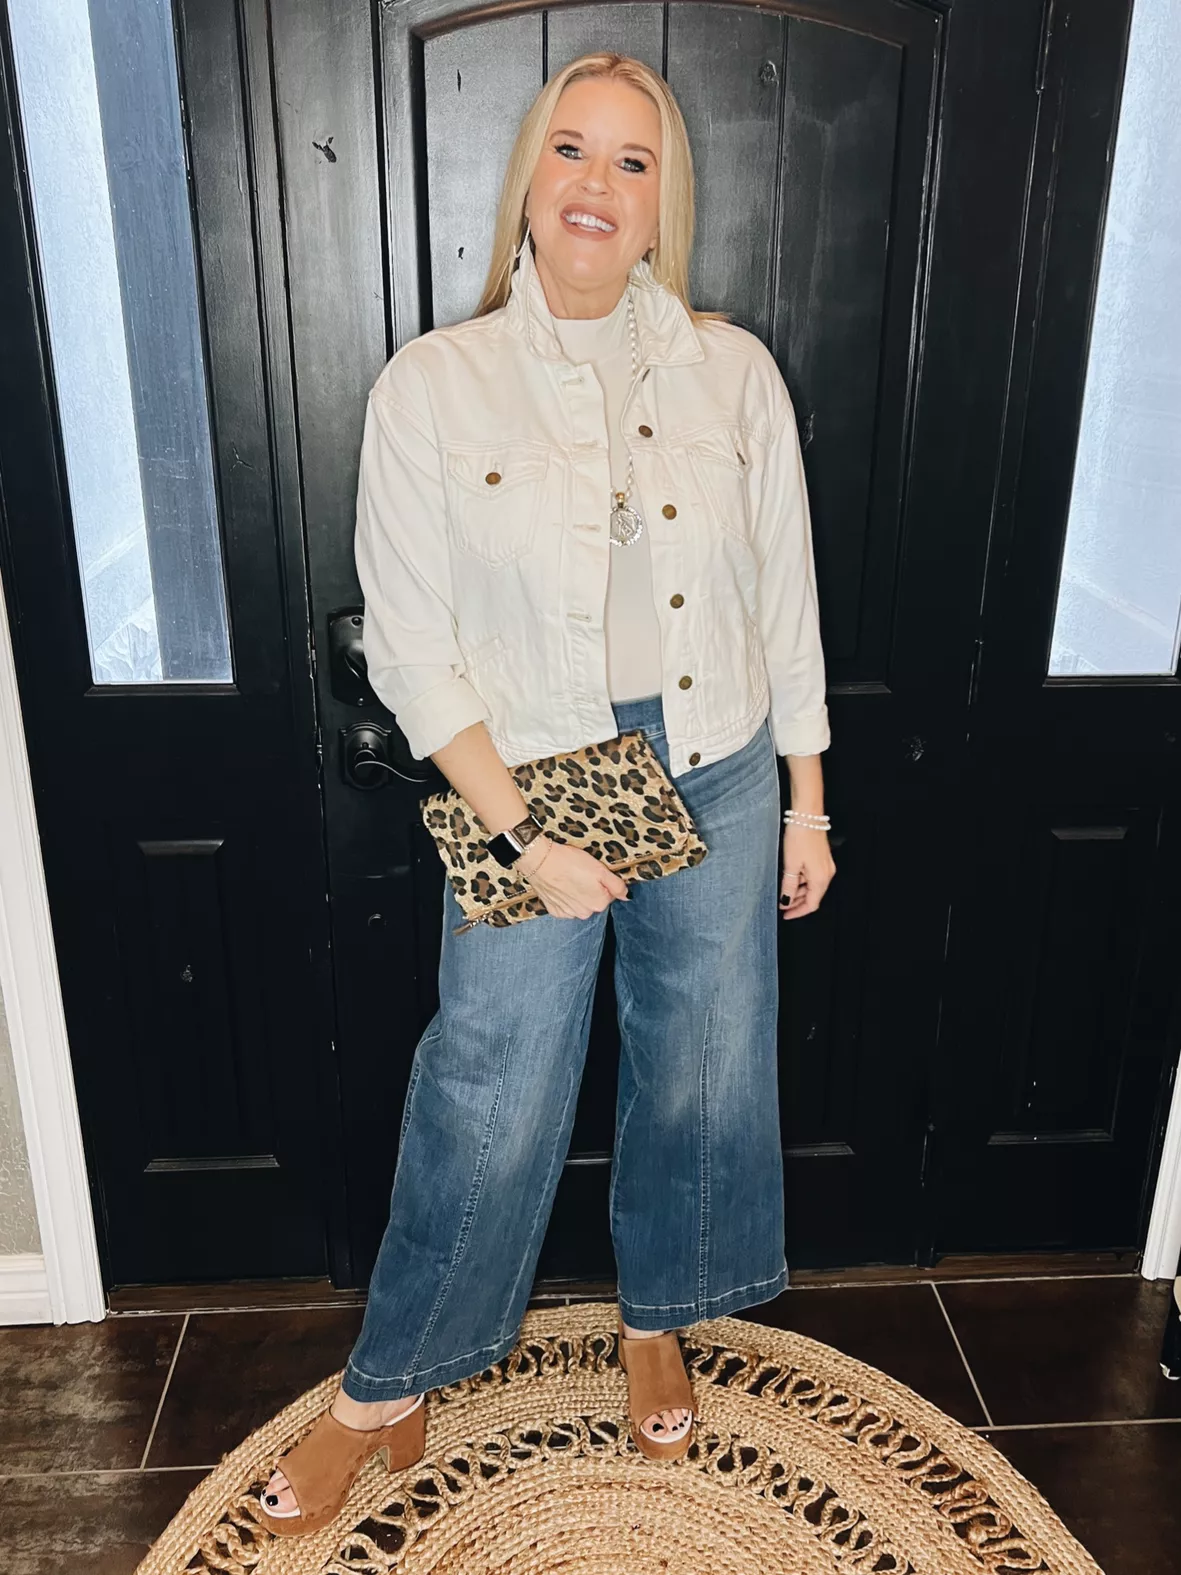 Let's try the new @spanx wide leg jeans! I got the small tall and